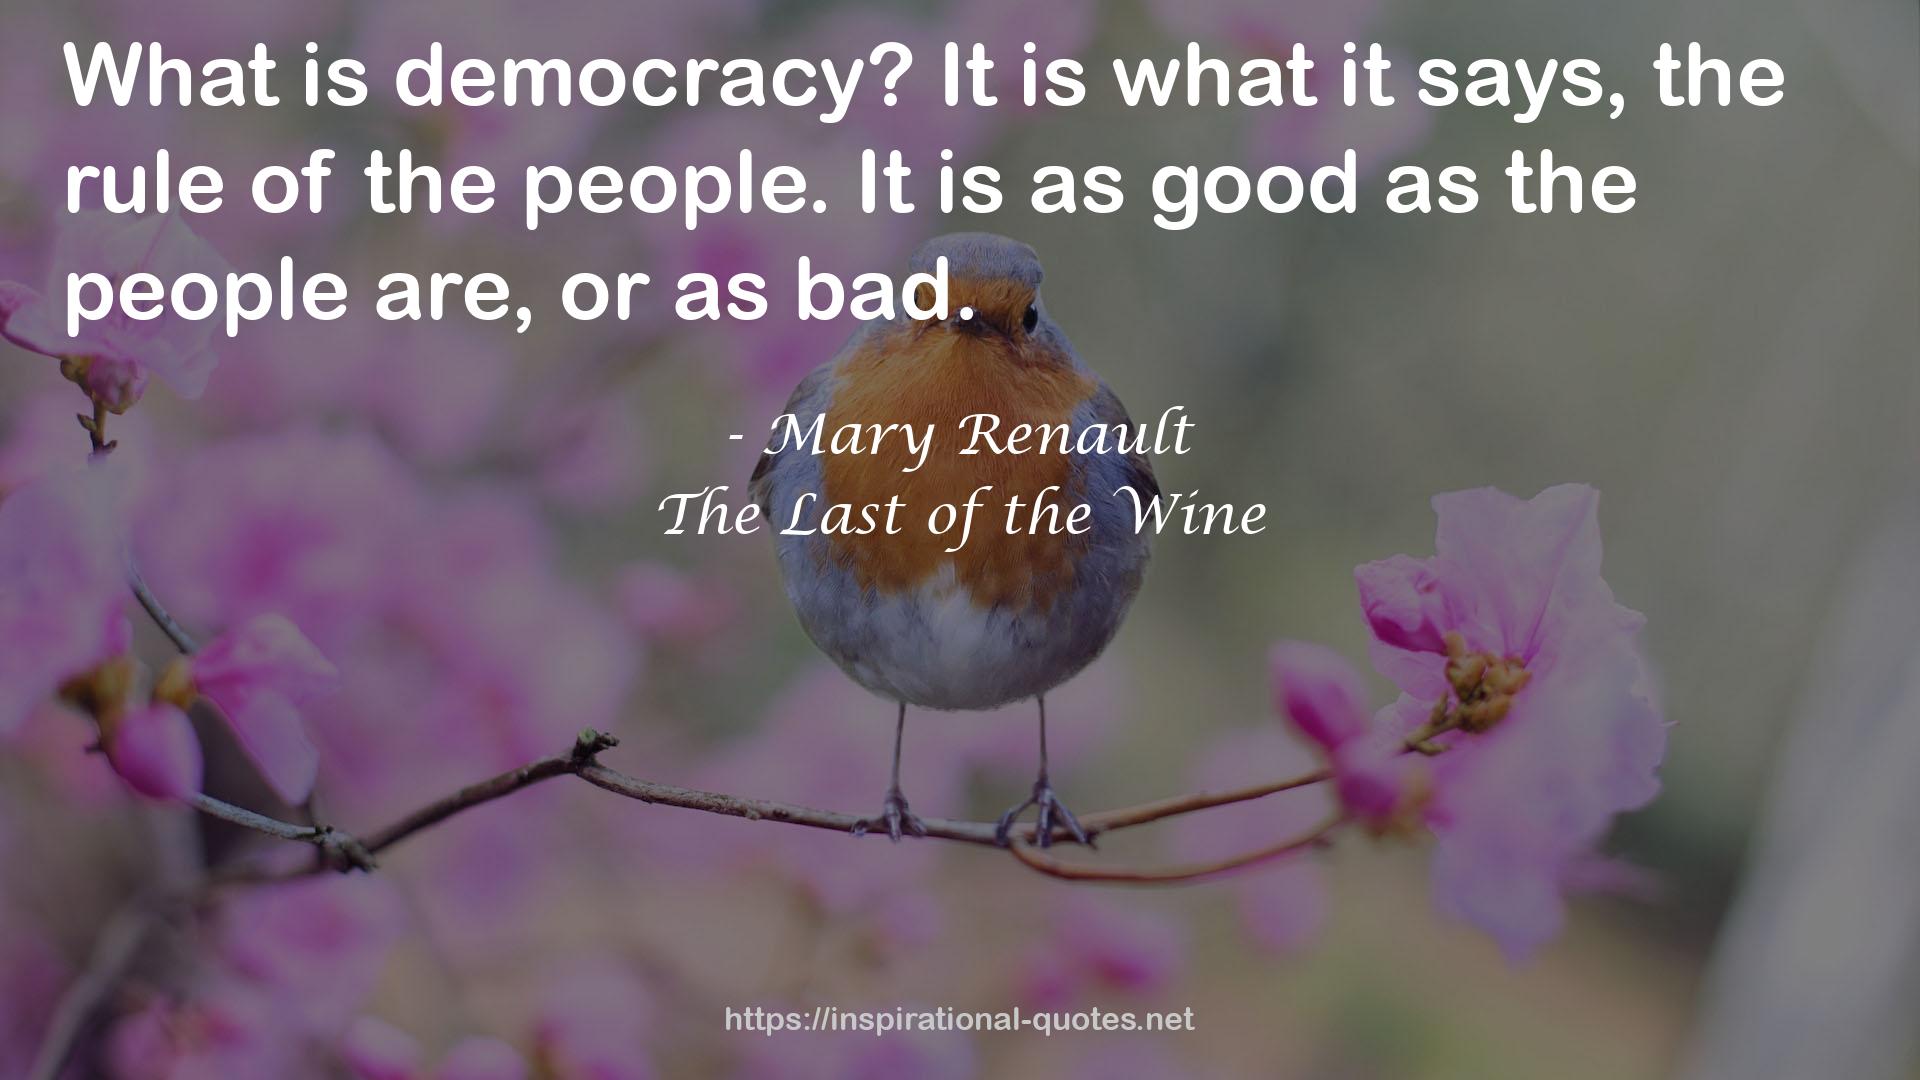 The Last of the Wine QUOTES